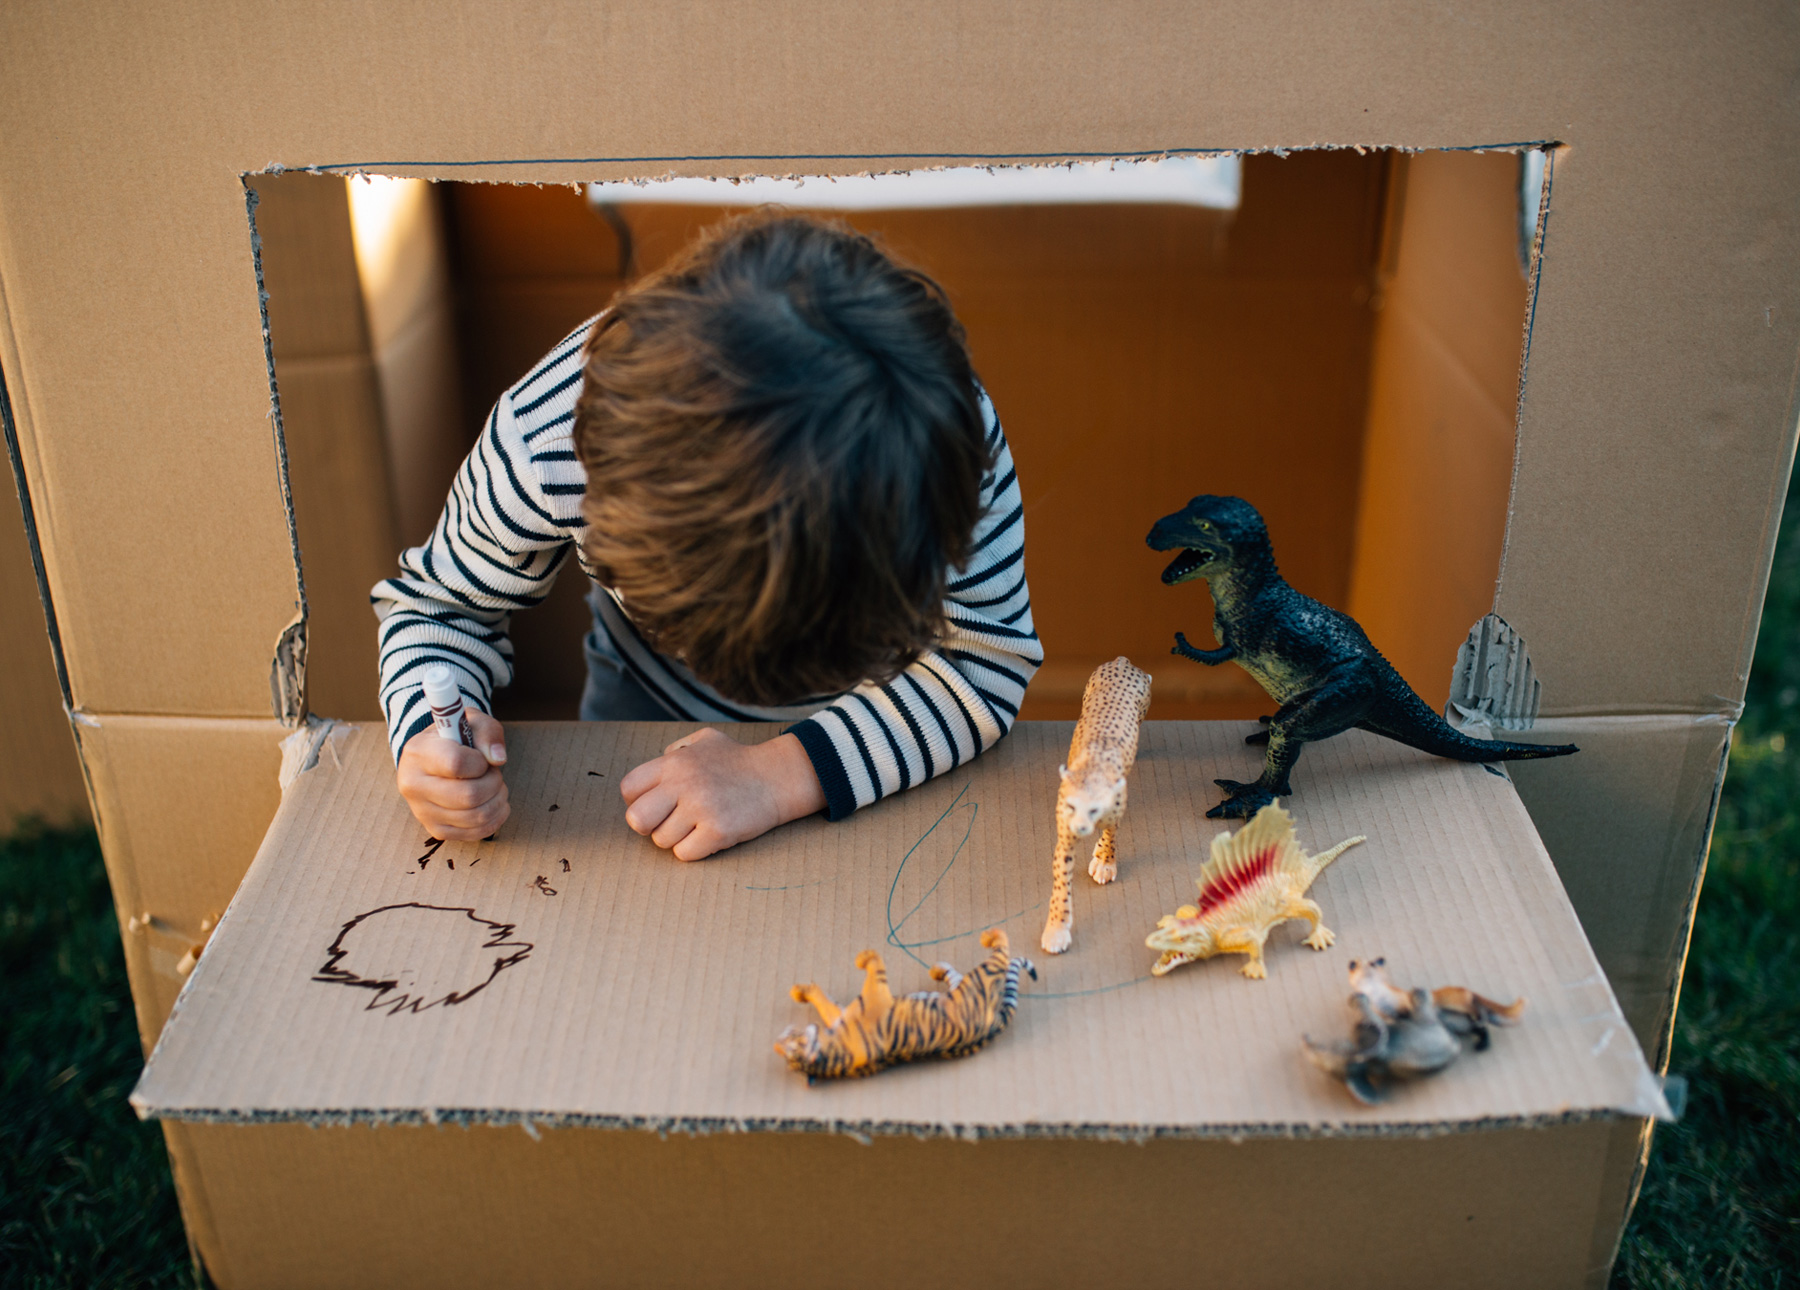 A child plays with dinosaurs on the window ledge of his cardboard box fort.